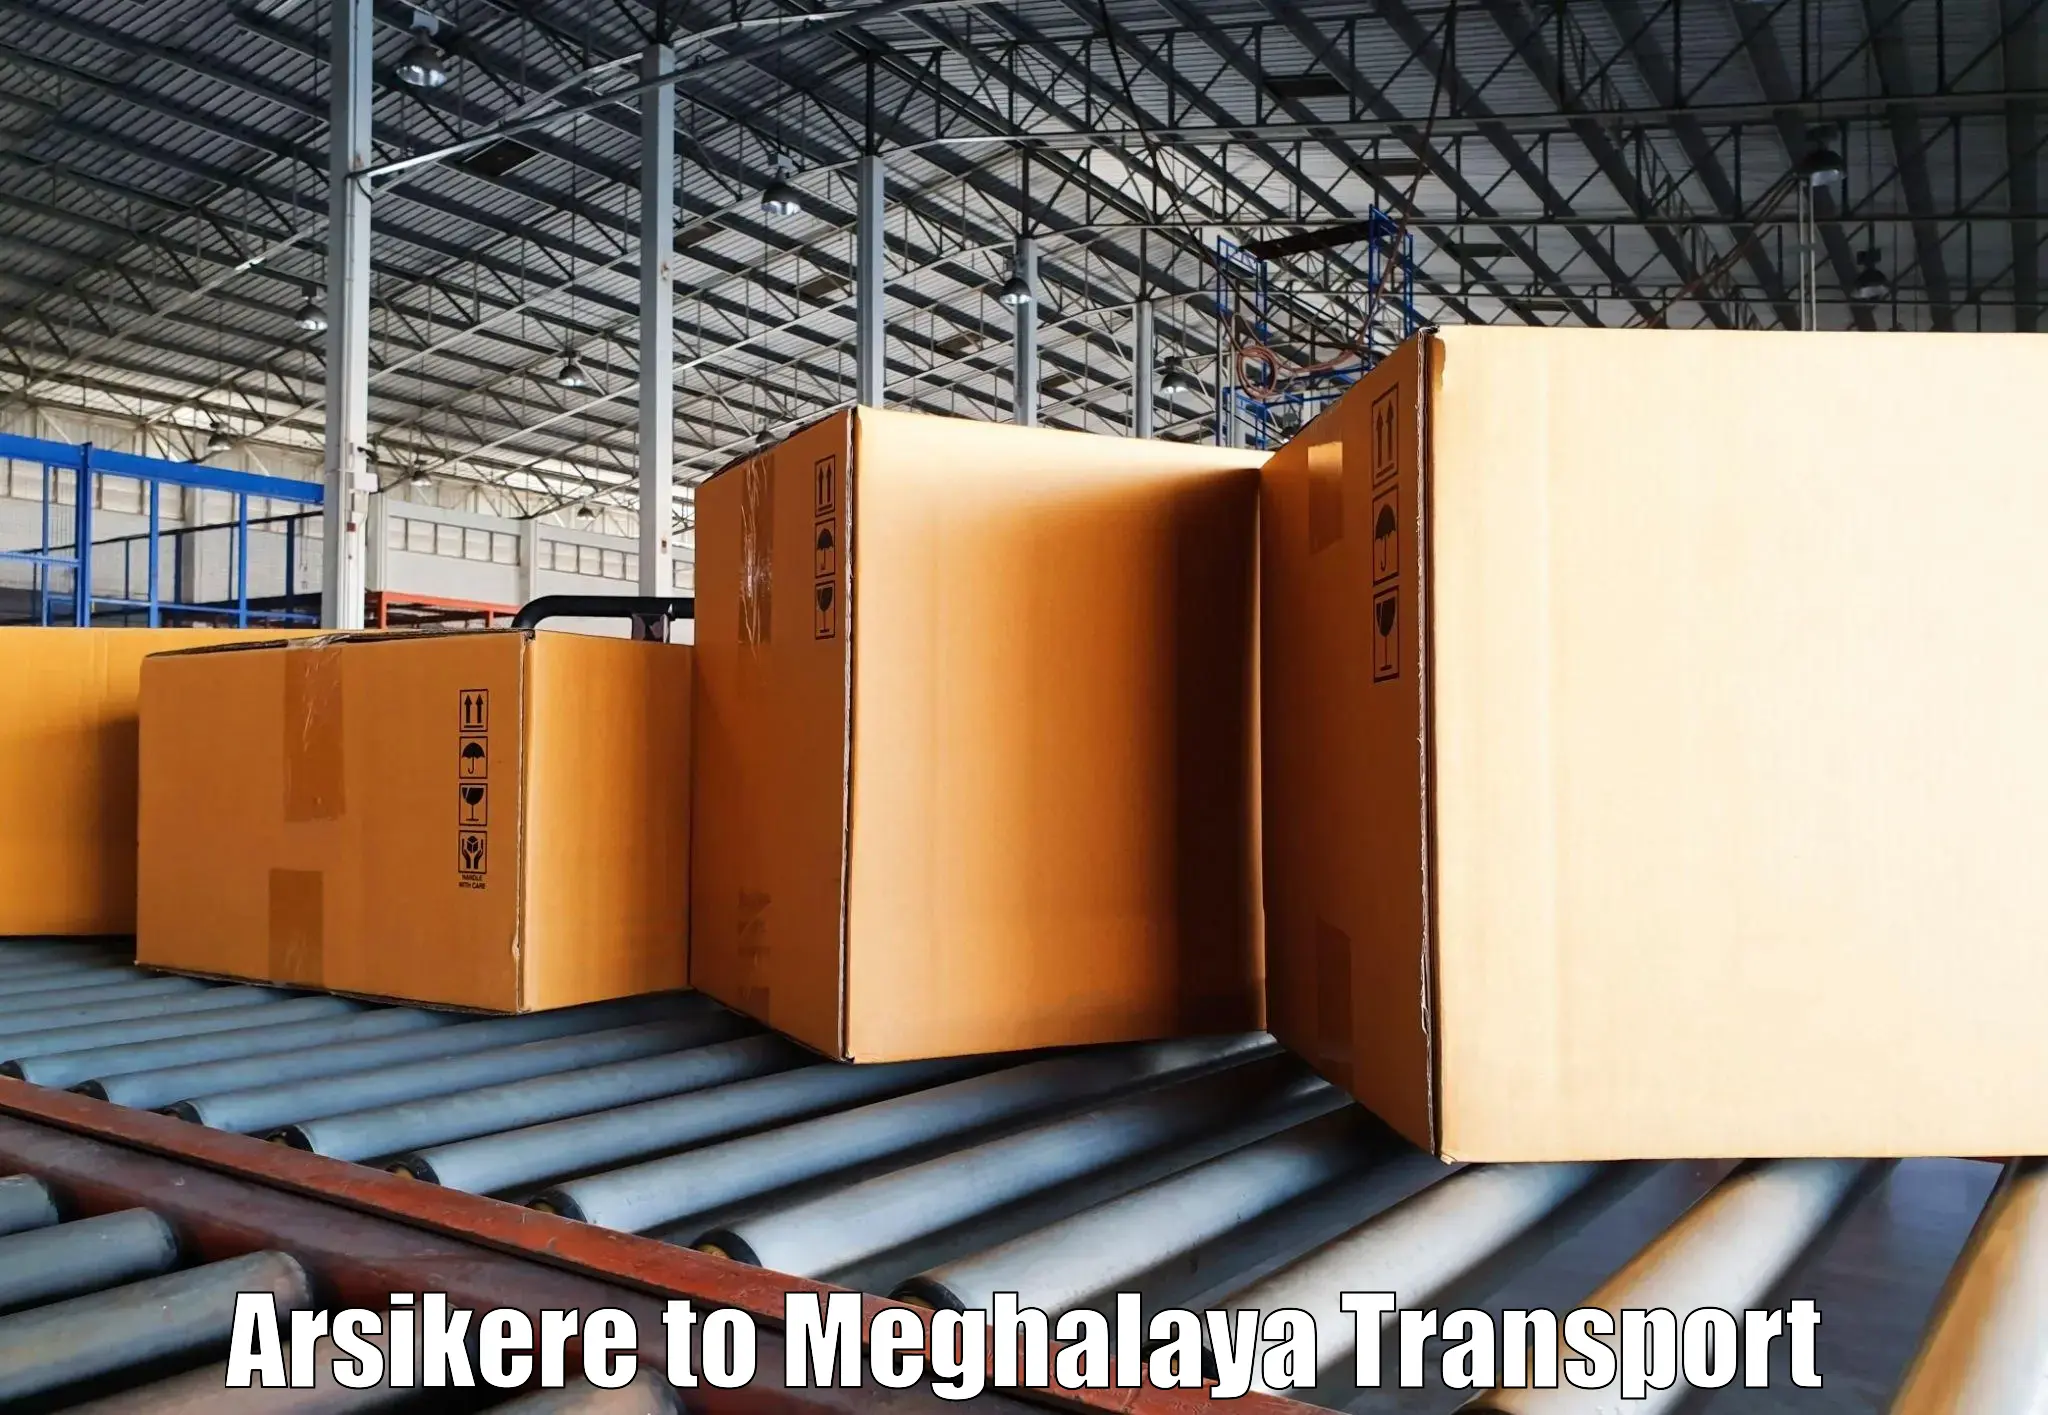 Air cargo transport services in Arsikere to Meghalaya